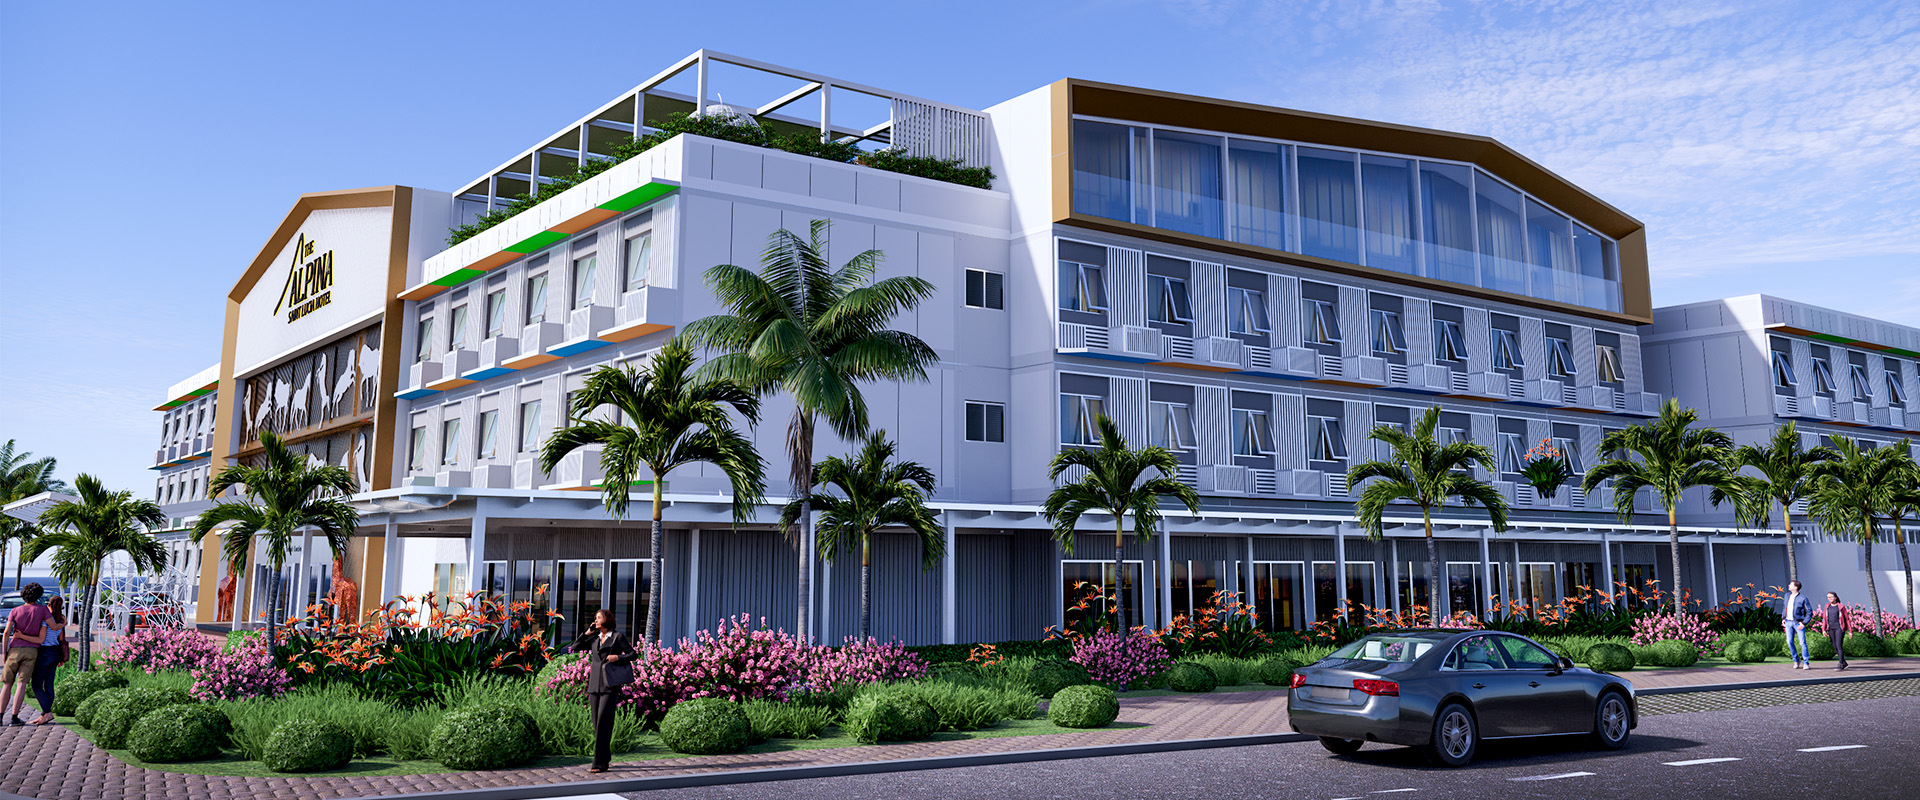 This CIP Approved 231-room hotel is a focal point of a town centre within the Pearl of the Caribbean.